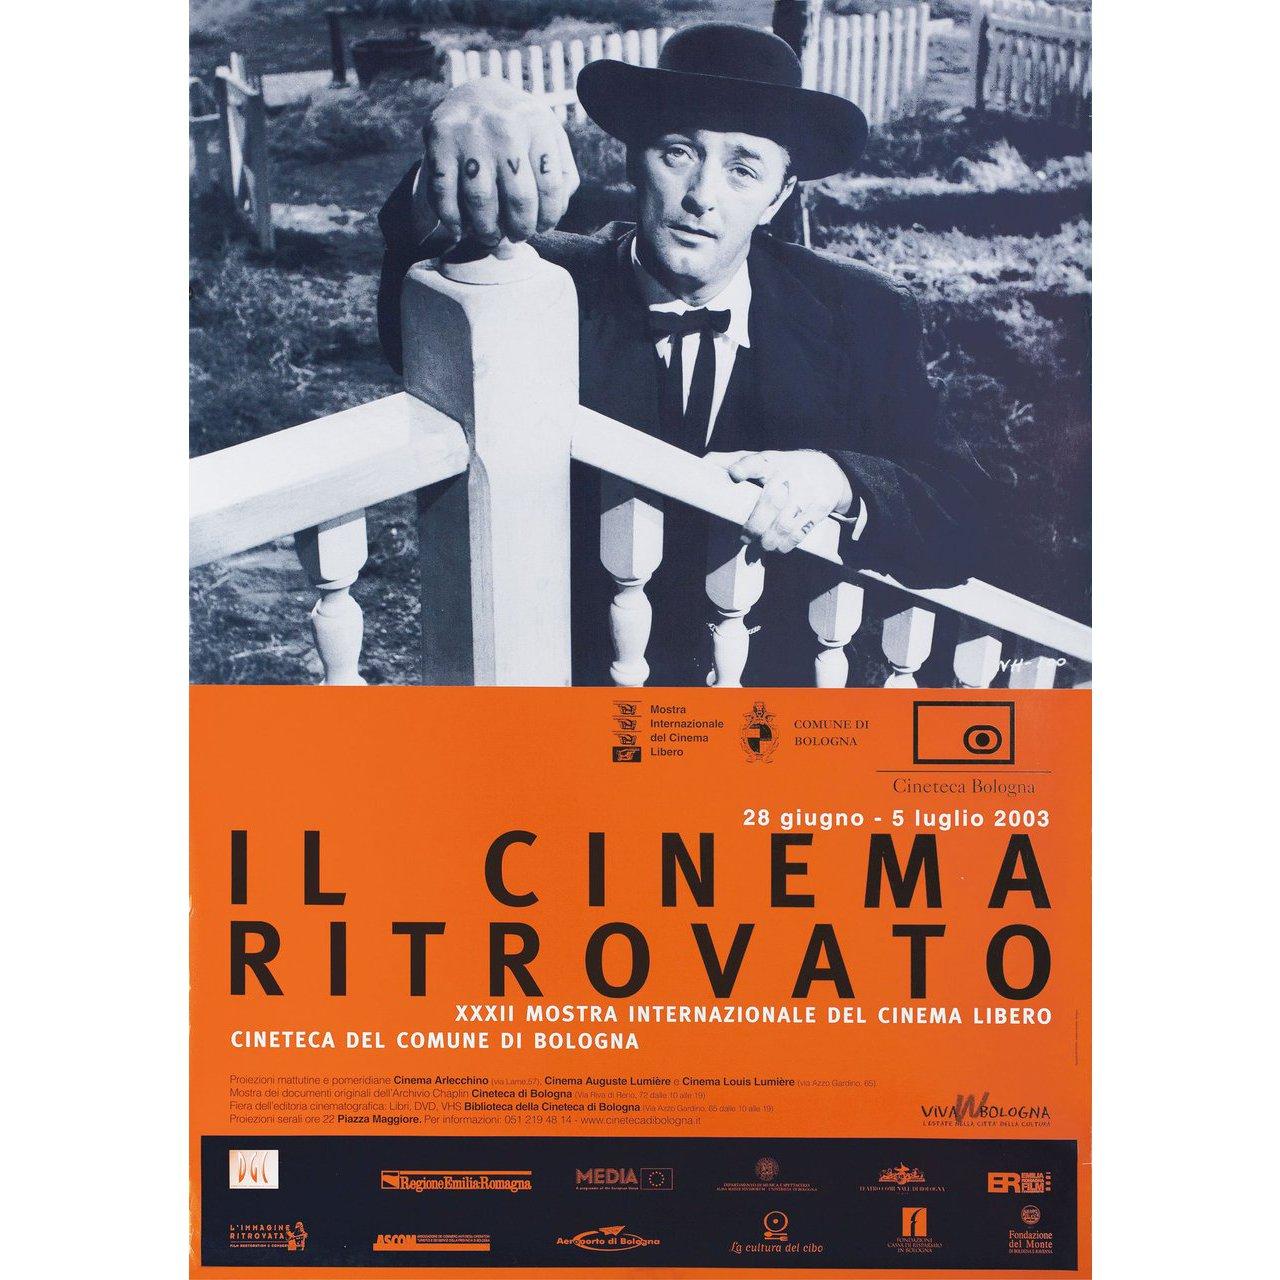 Original 2003 Italian foglio poster for the festival Il Cinema Ritrovato. Very Good-Fine condition, rolled. Please note: the size is stated in inches and the actual size can vary by an inch or more.
